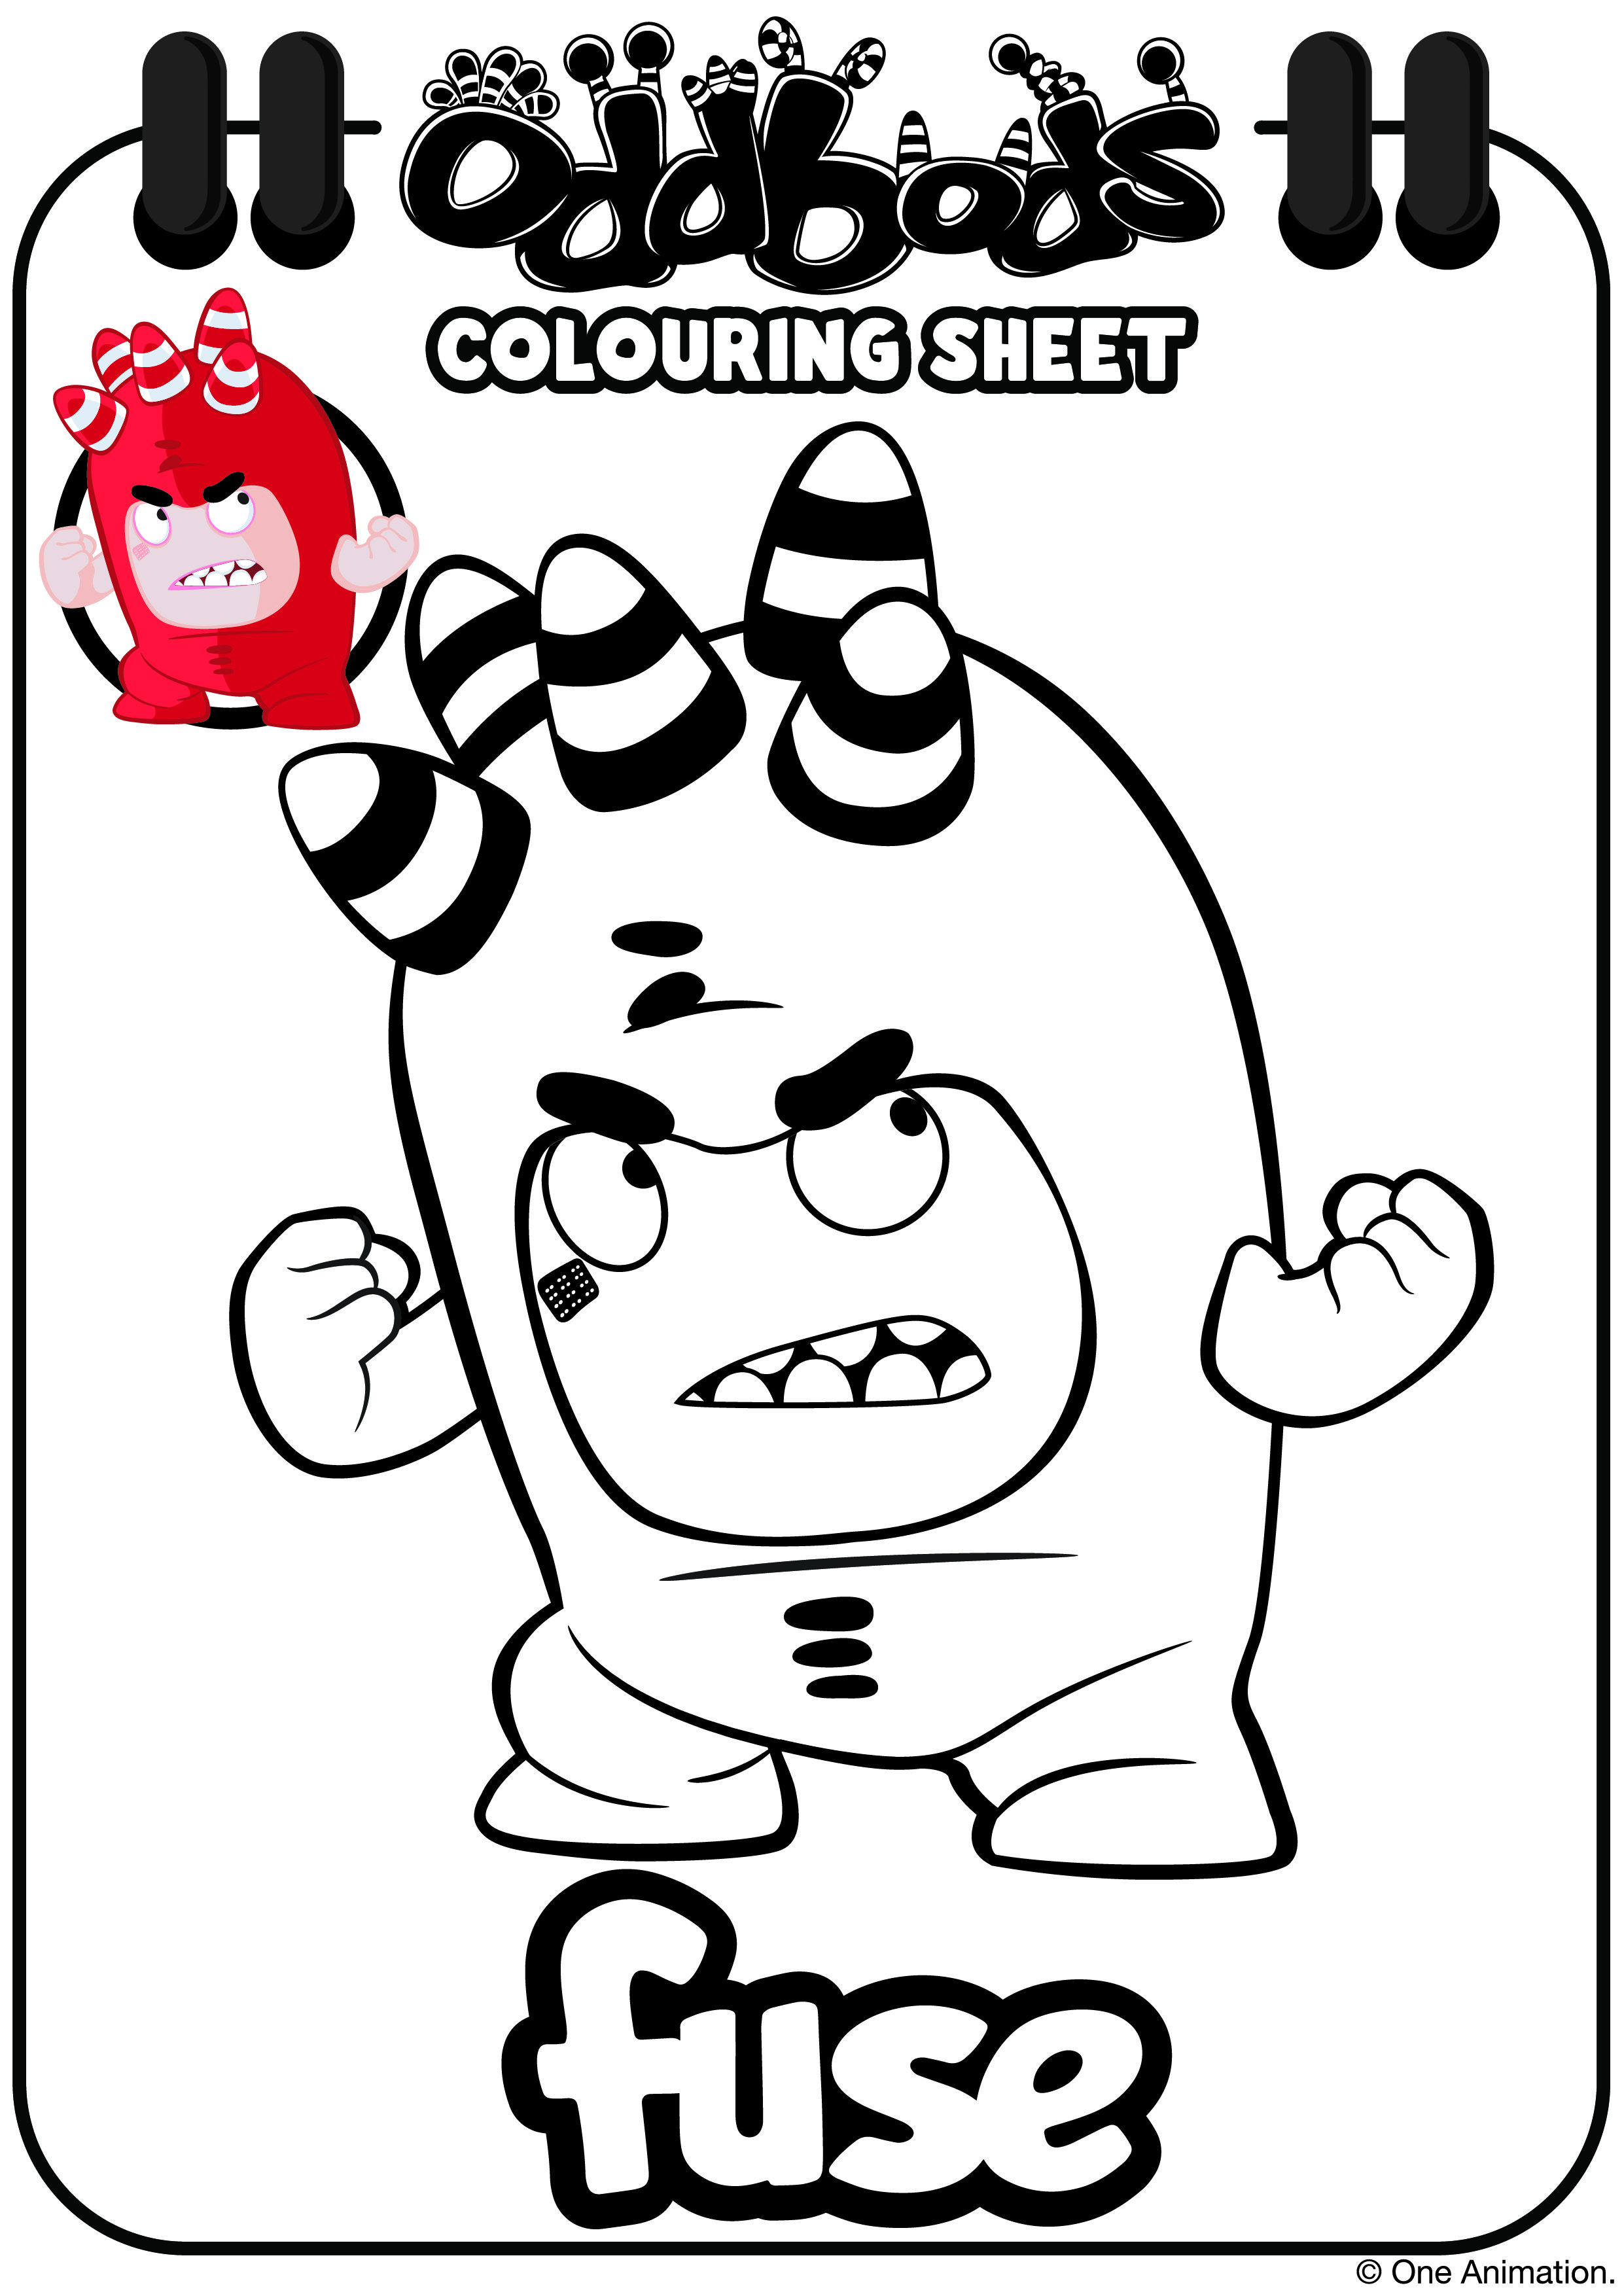 Oddbods Colouring Sheet - Fuse | Kids coloring books, Coloring books, Coloring  sheets